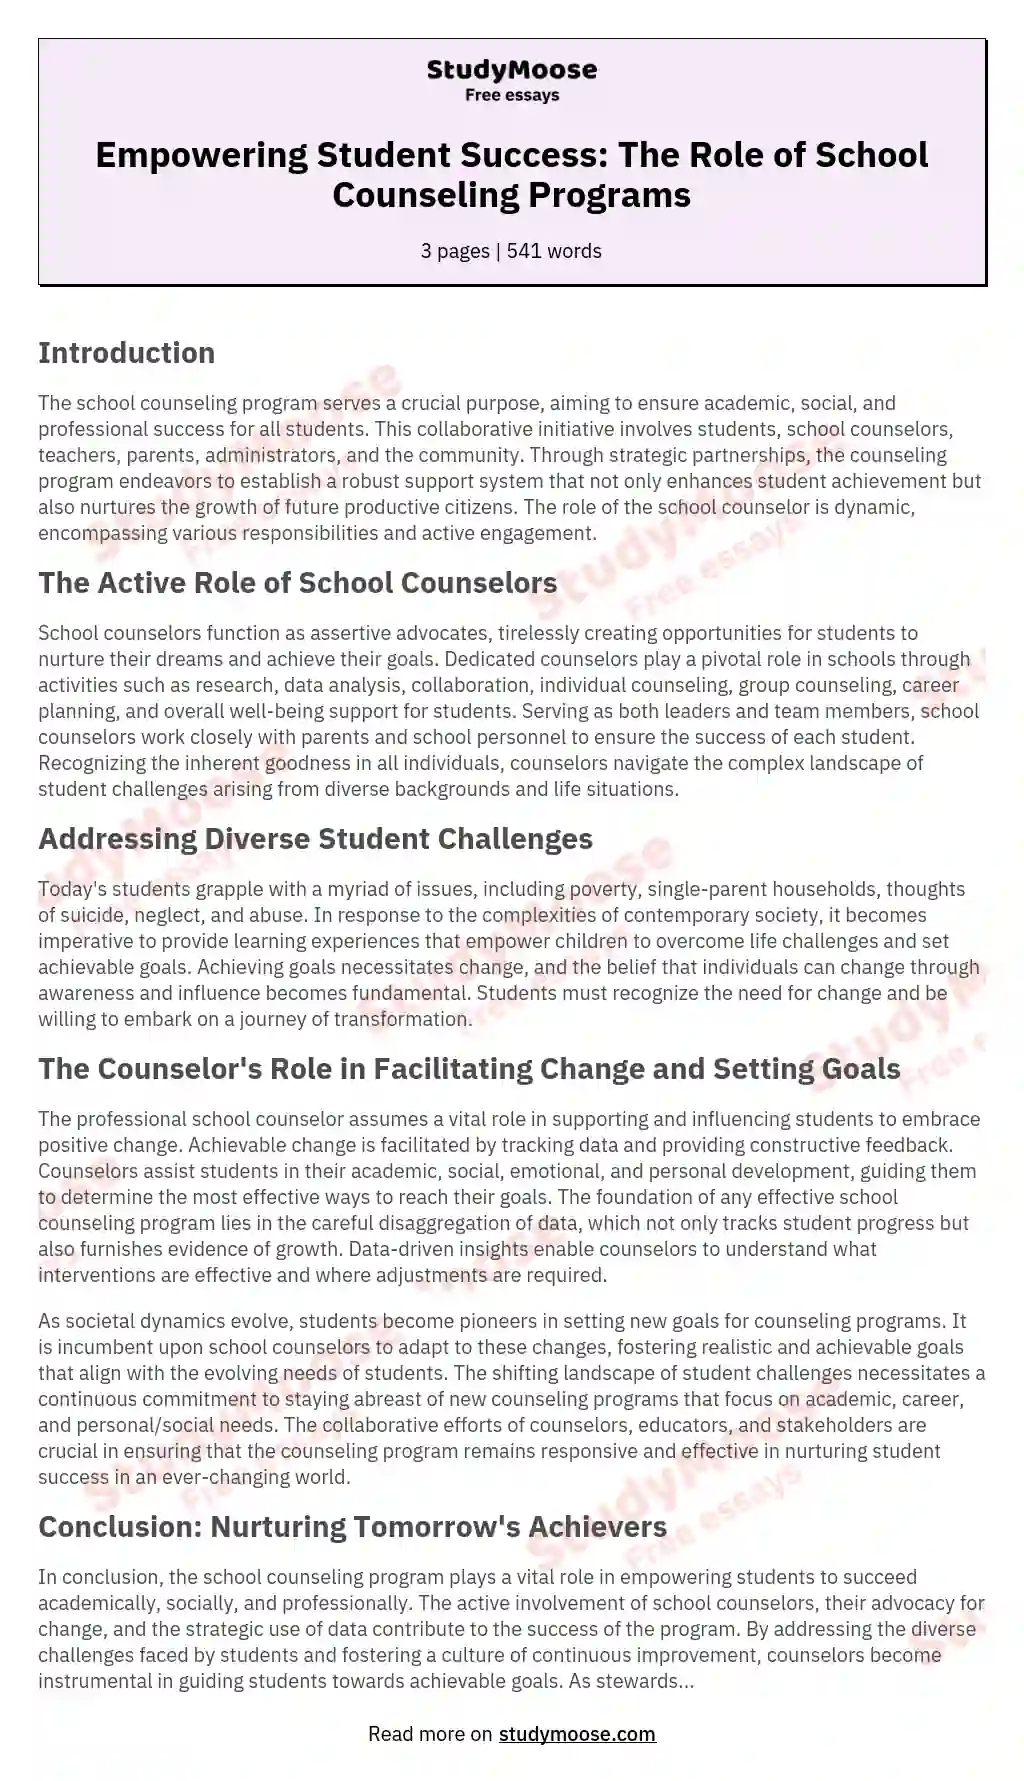 Empowering Student Success: The Role of School Counseling Programs essay